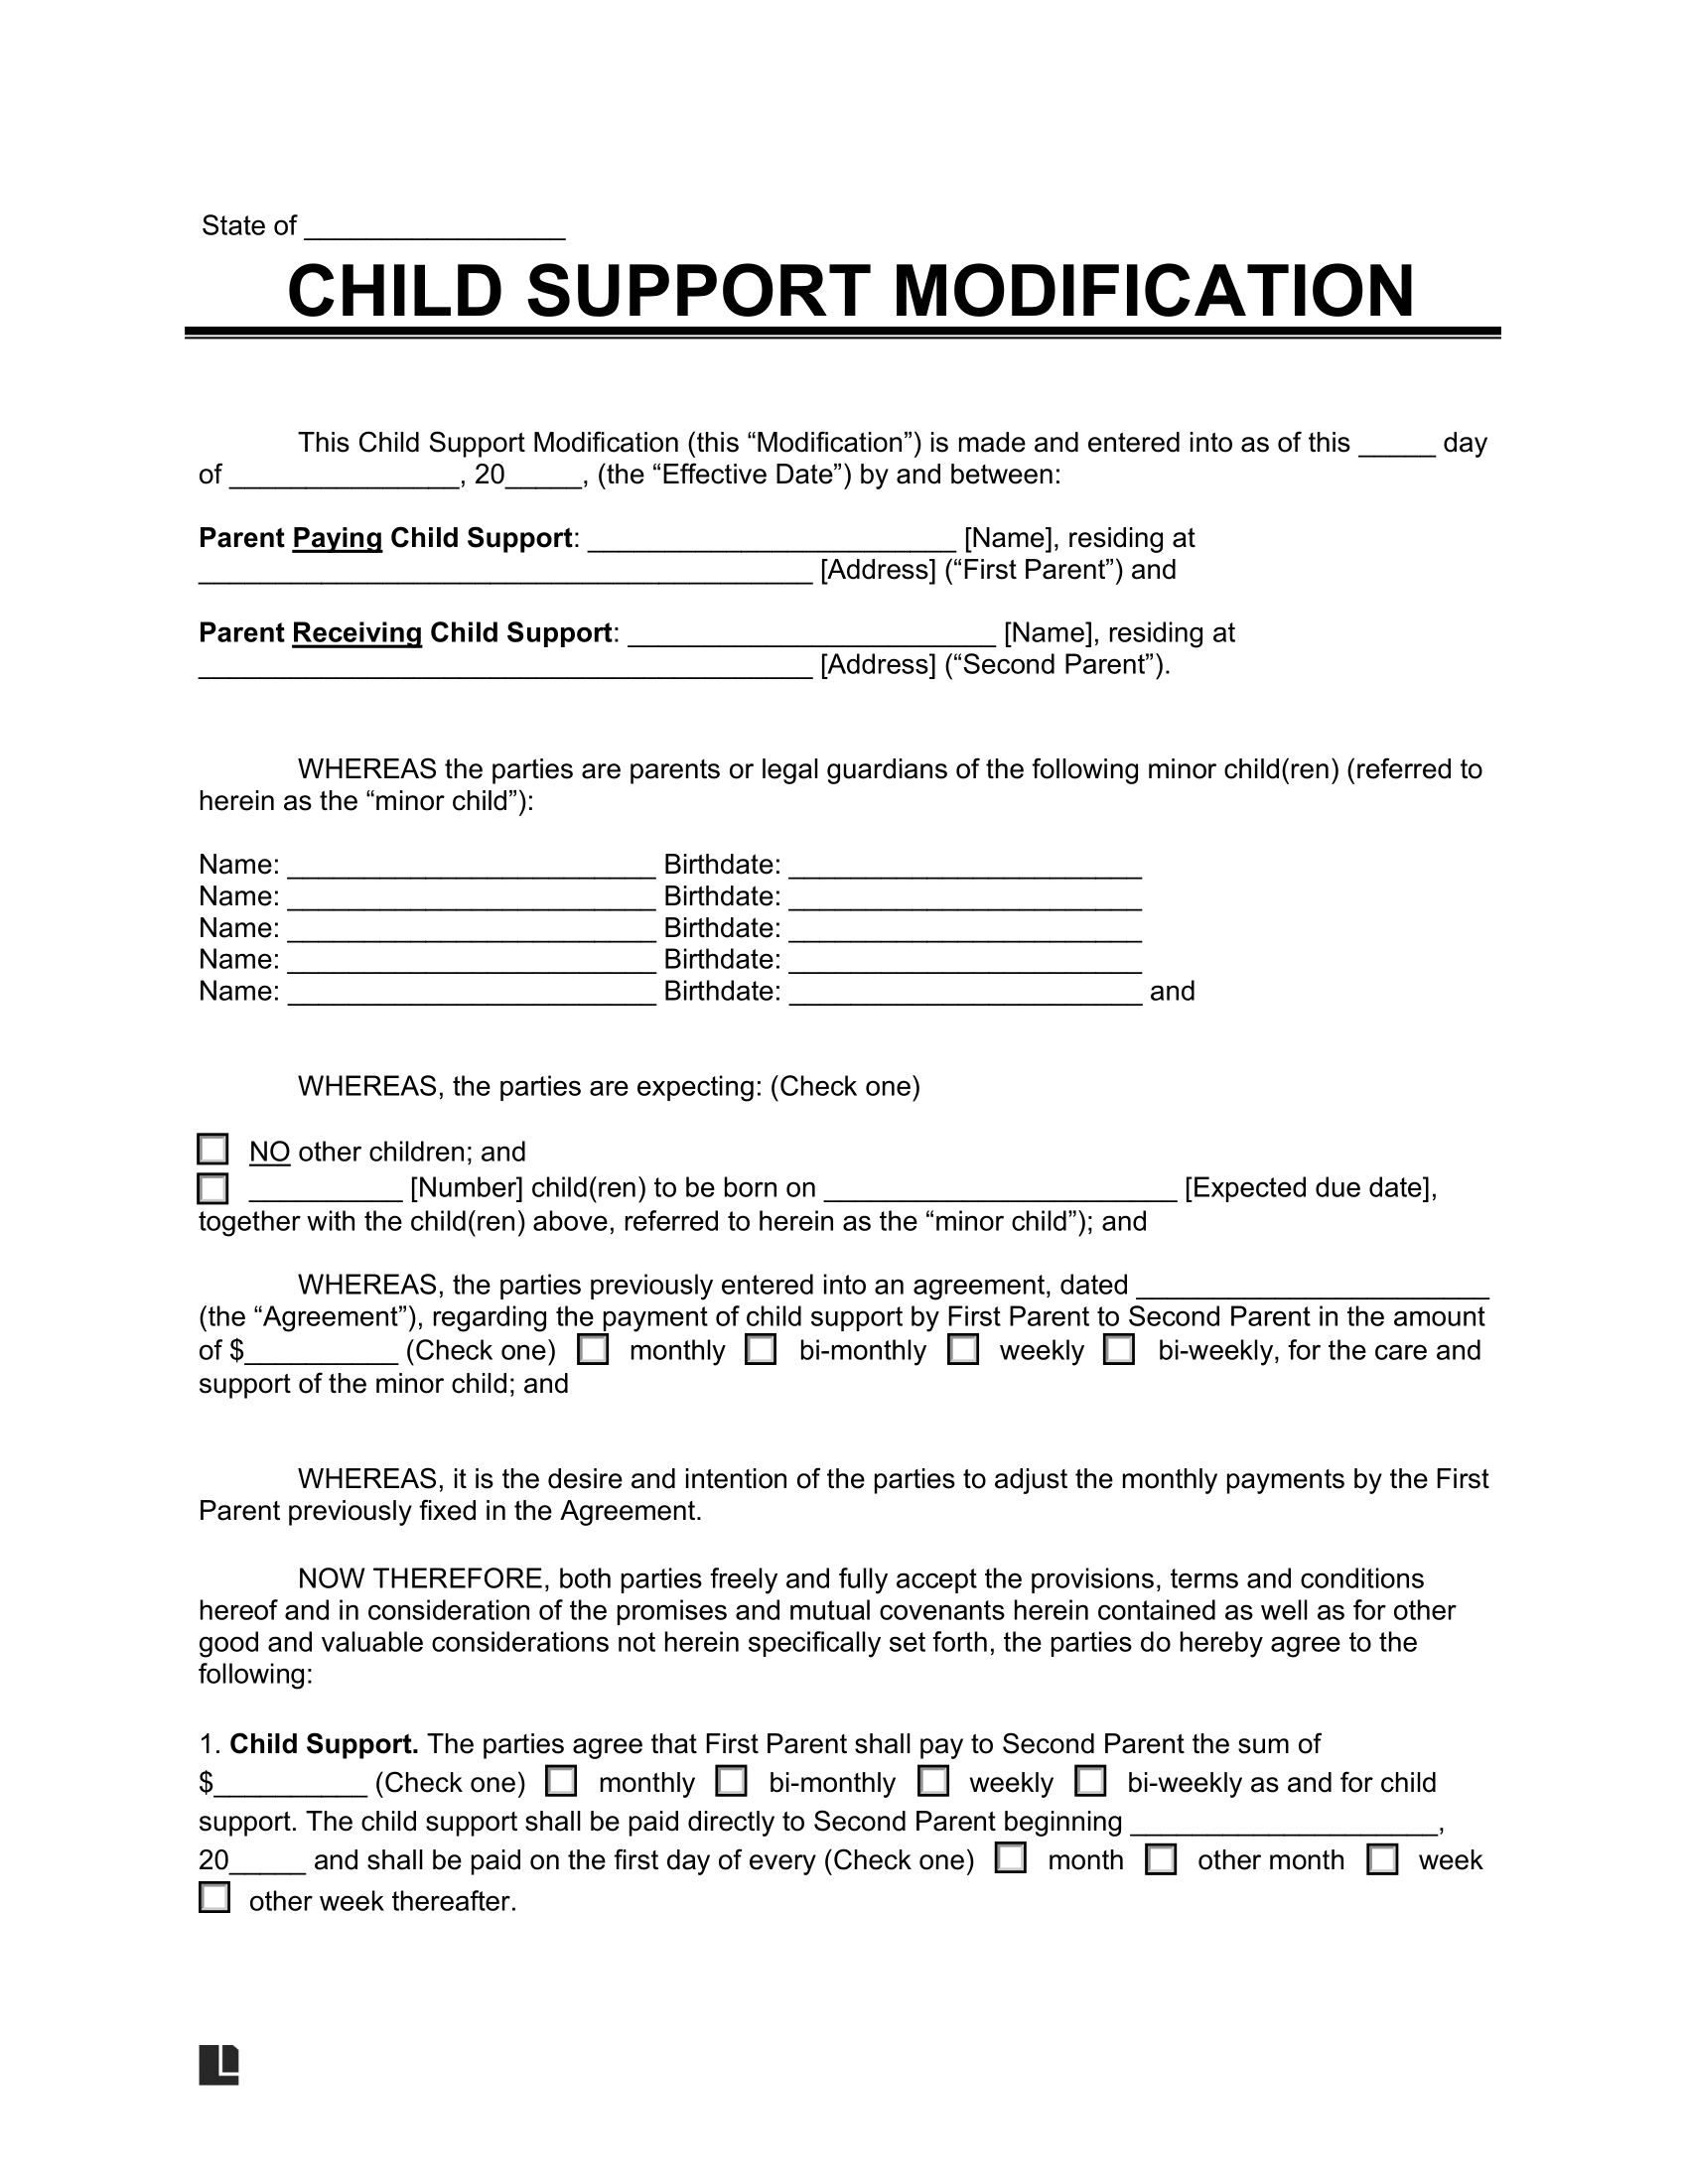 Child Support Modification Form